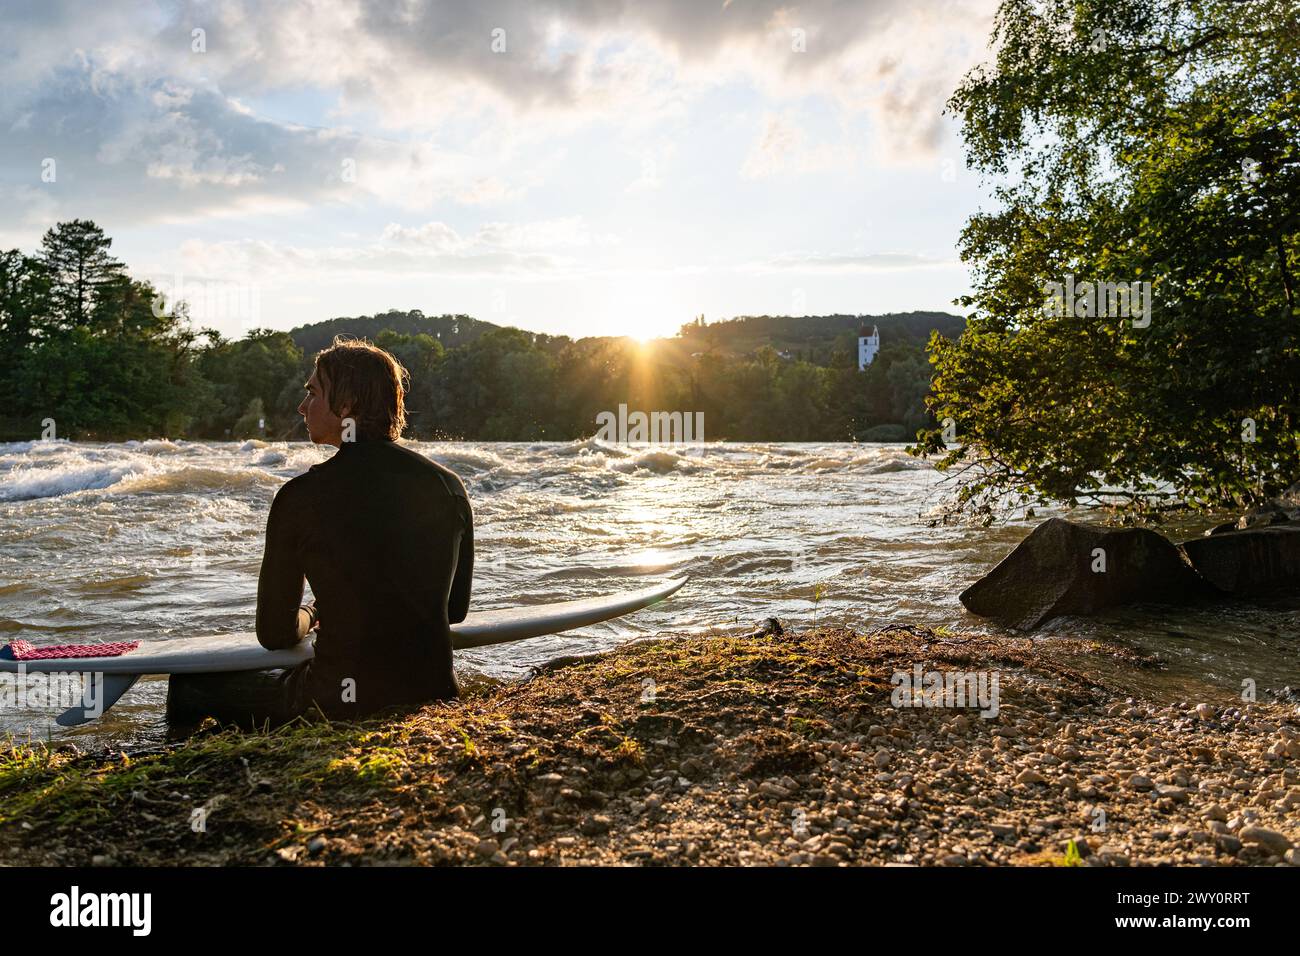 A young surfer sits by the Aare River, gazing at the sunset, enjoying the calm ambiance. Stock Photo